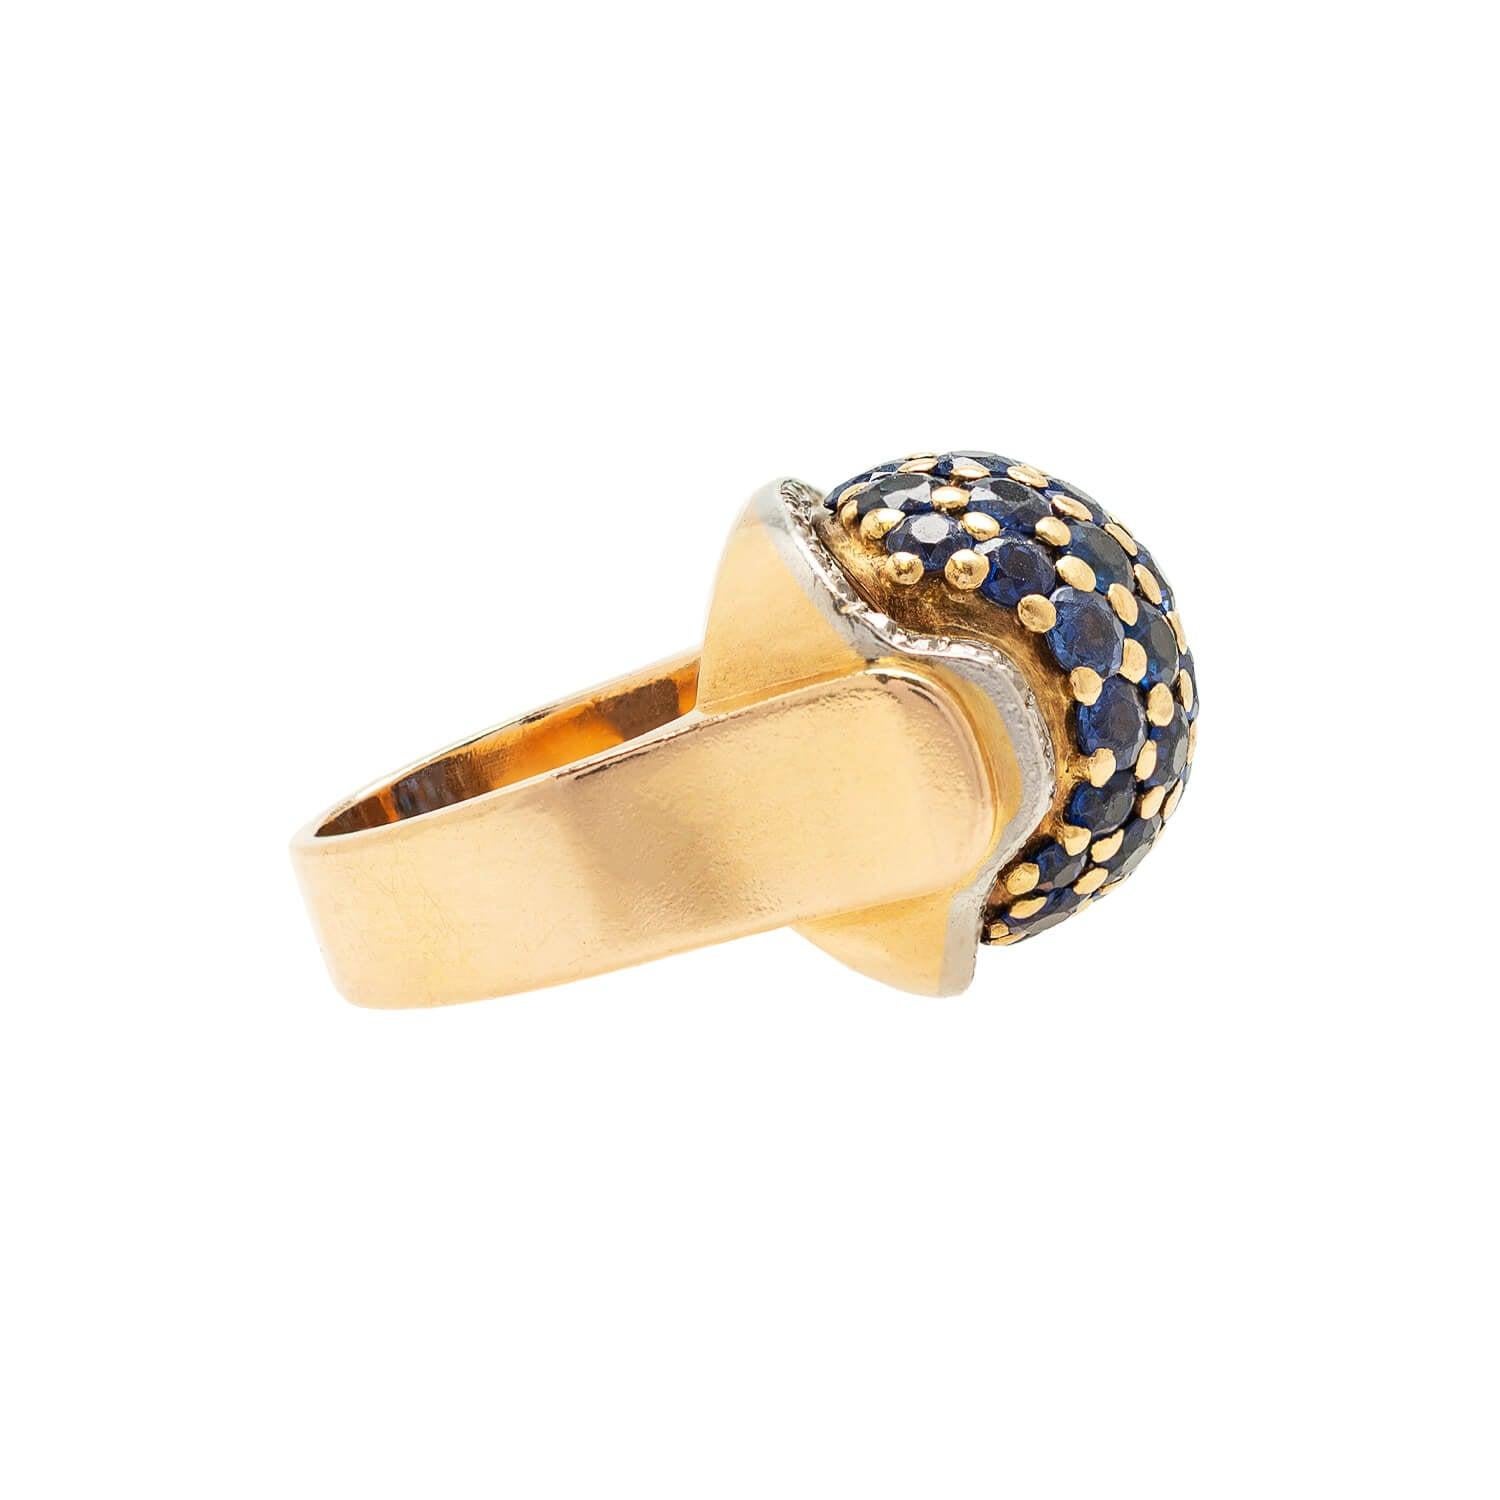 A fabulous bombé style ring from the Retro (ca1940s) era! Crafted in 18kt white and yellow gold, this fabulous piece has a classic Retro appeal and features sapphires and diamonds, all set within a dual-tone gold setting. Beautiful rich blue